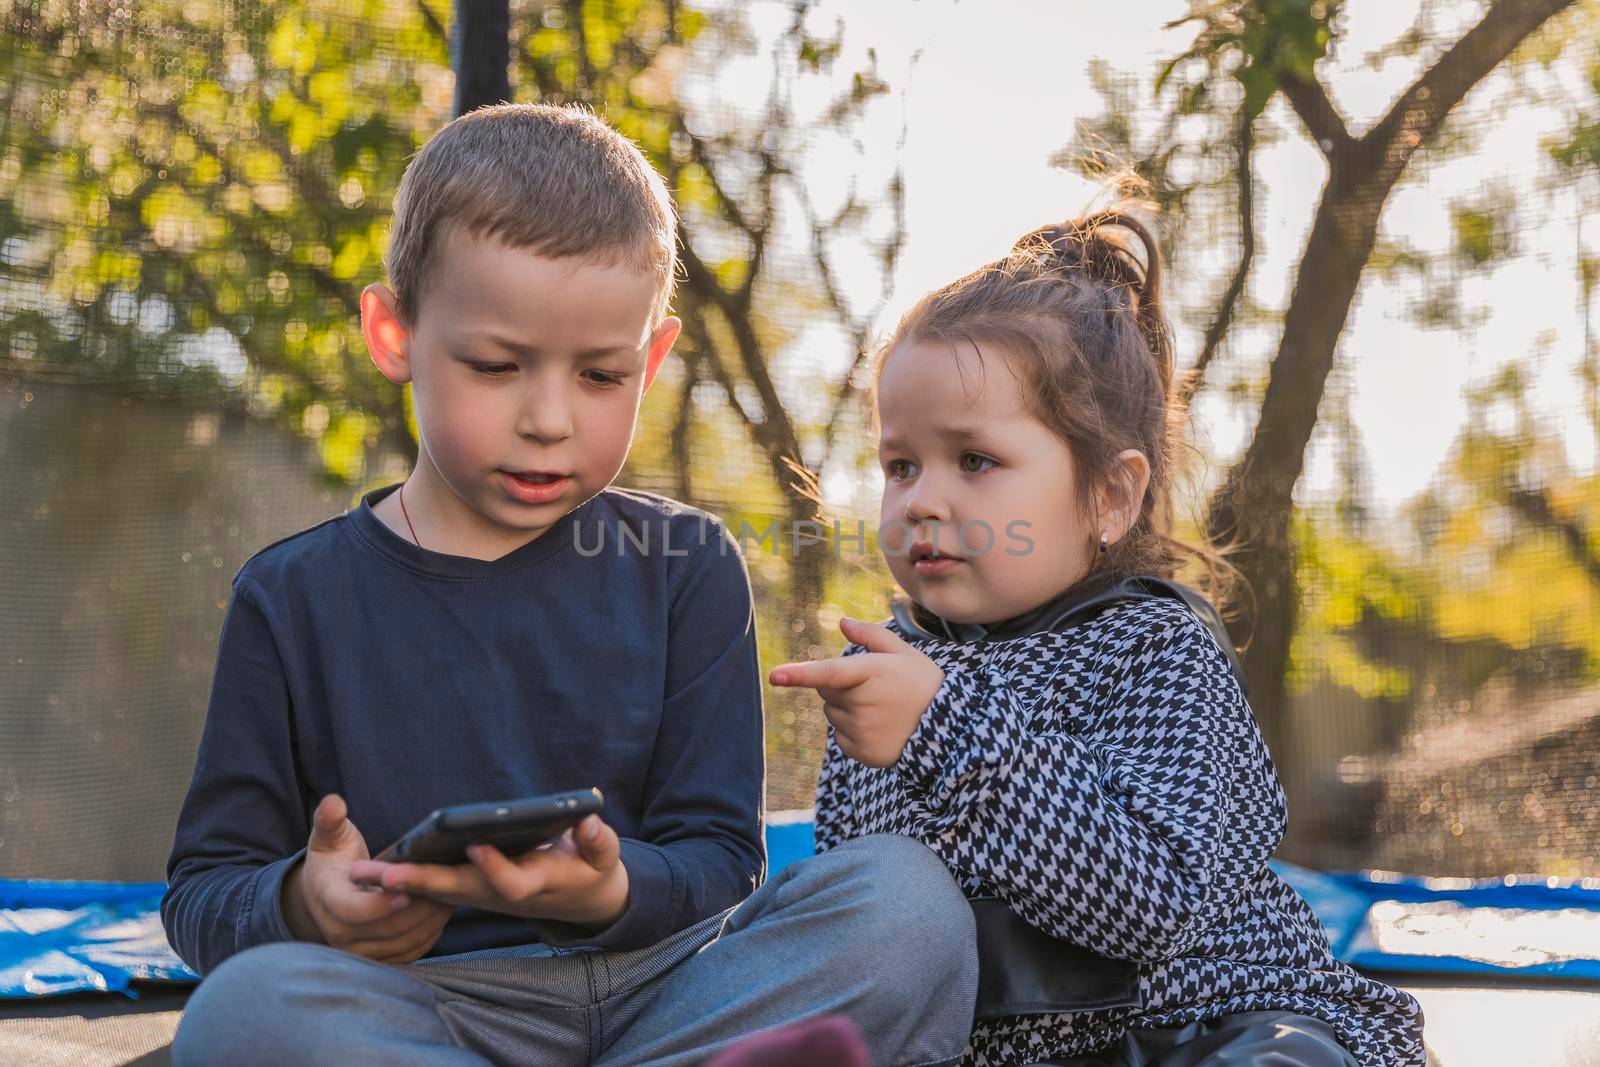 children sit on a trampoline and look at the phone